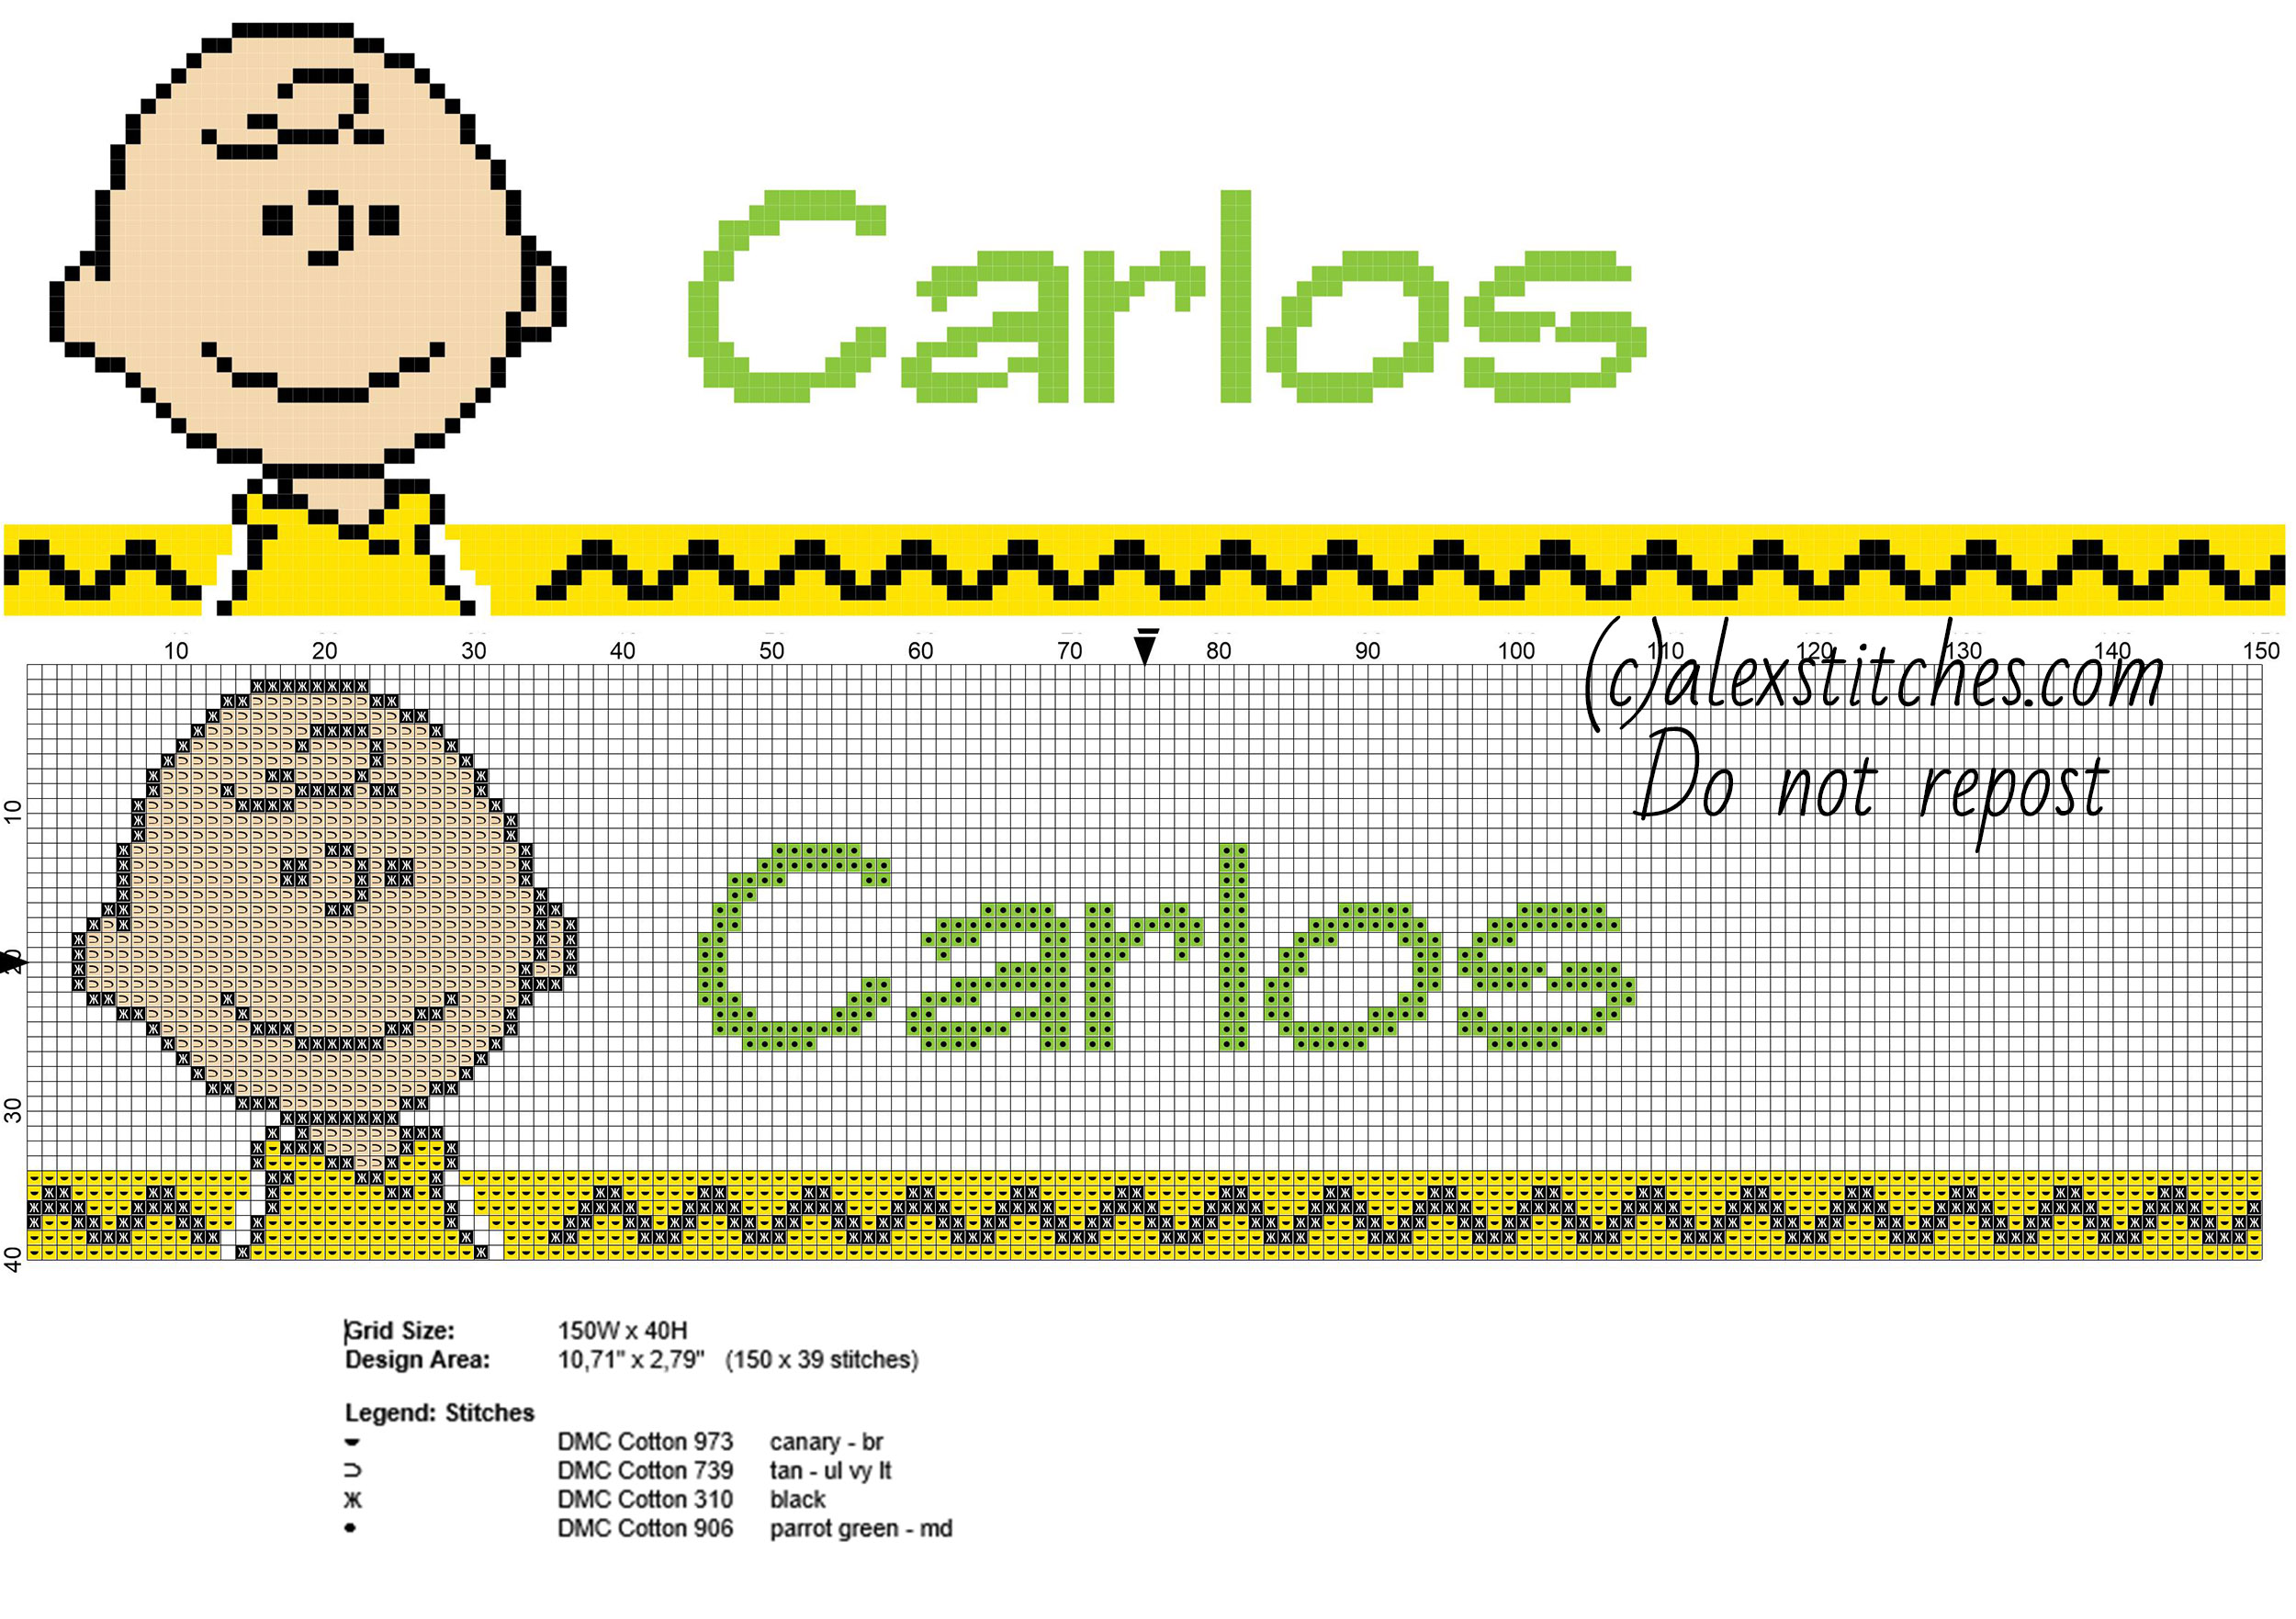 Carlos cross stitch baby male name with Charlie Brown character from Charlie Brown cartoons